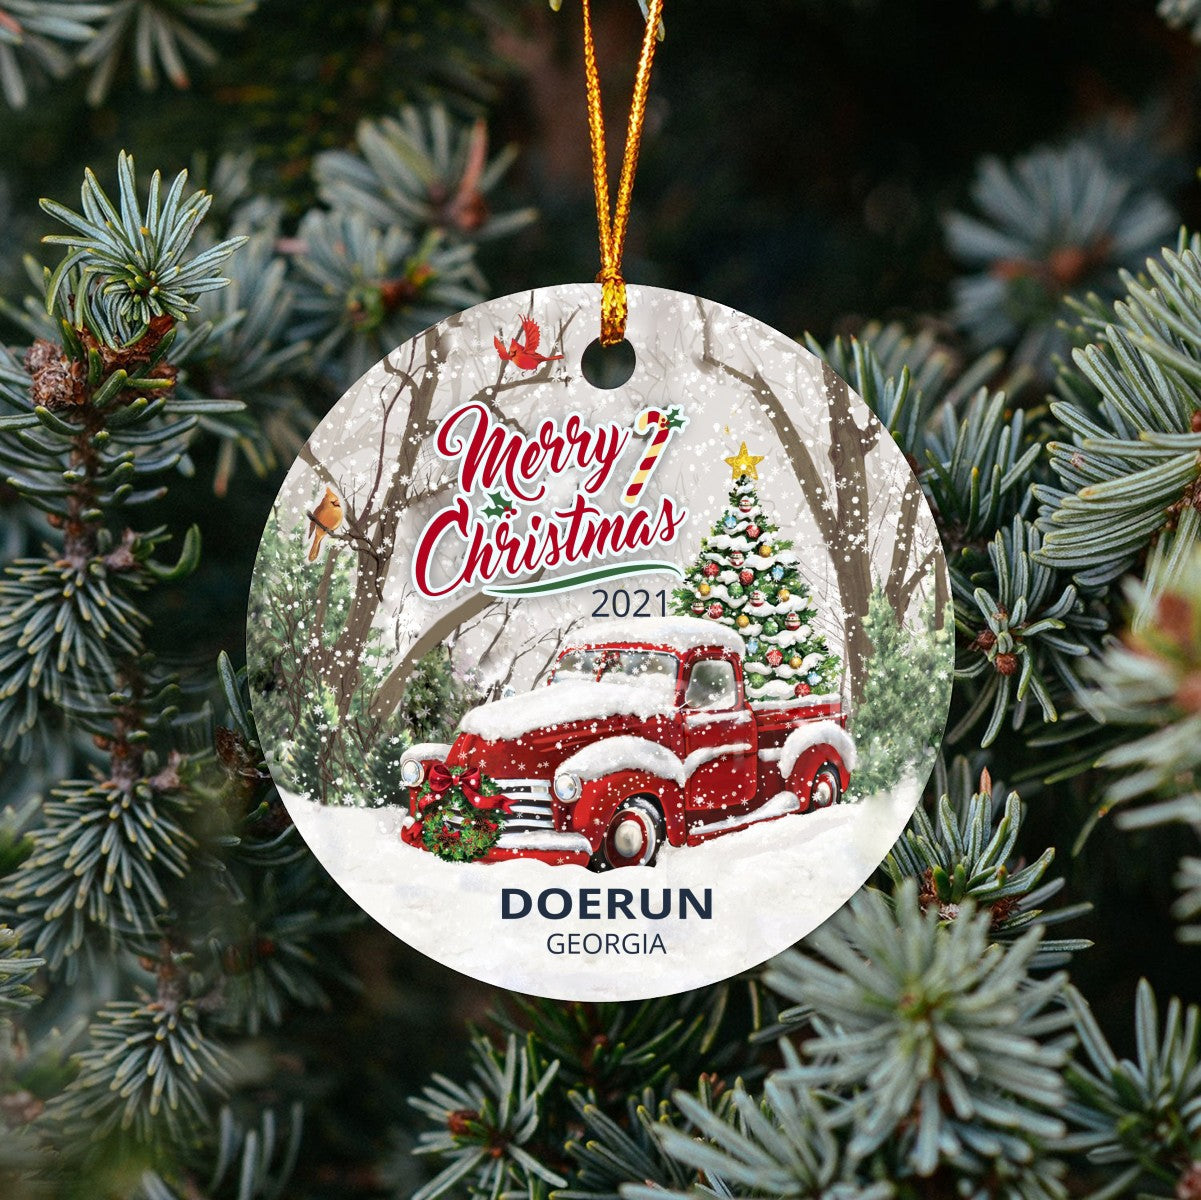 Christmas Tree Ornaments Doerun - Ornament With Name City, State Doerun Georgia GA Ornament - Red Truck Xmas Ornaments 3'' Plastic Gift For Family, Friend And Housewarming